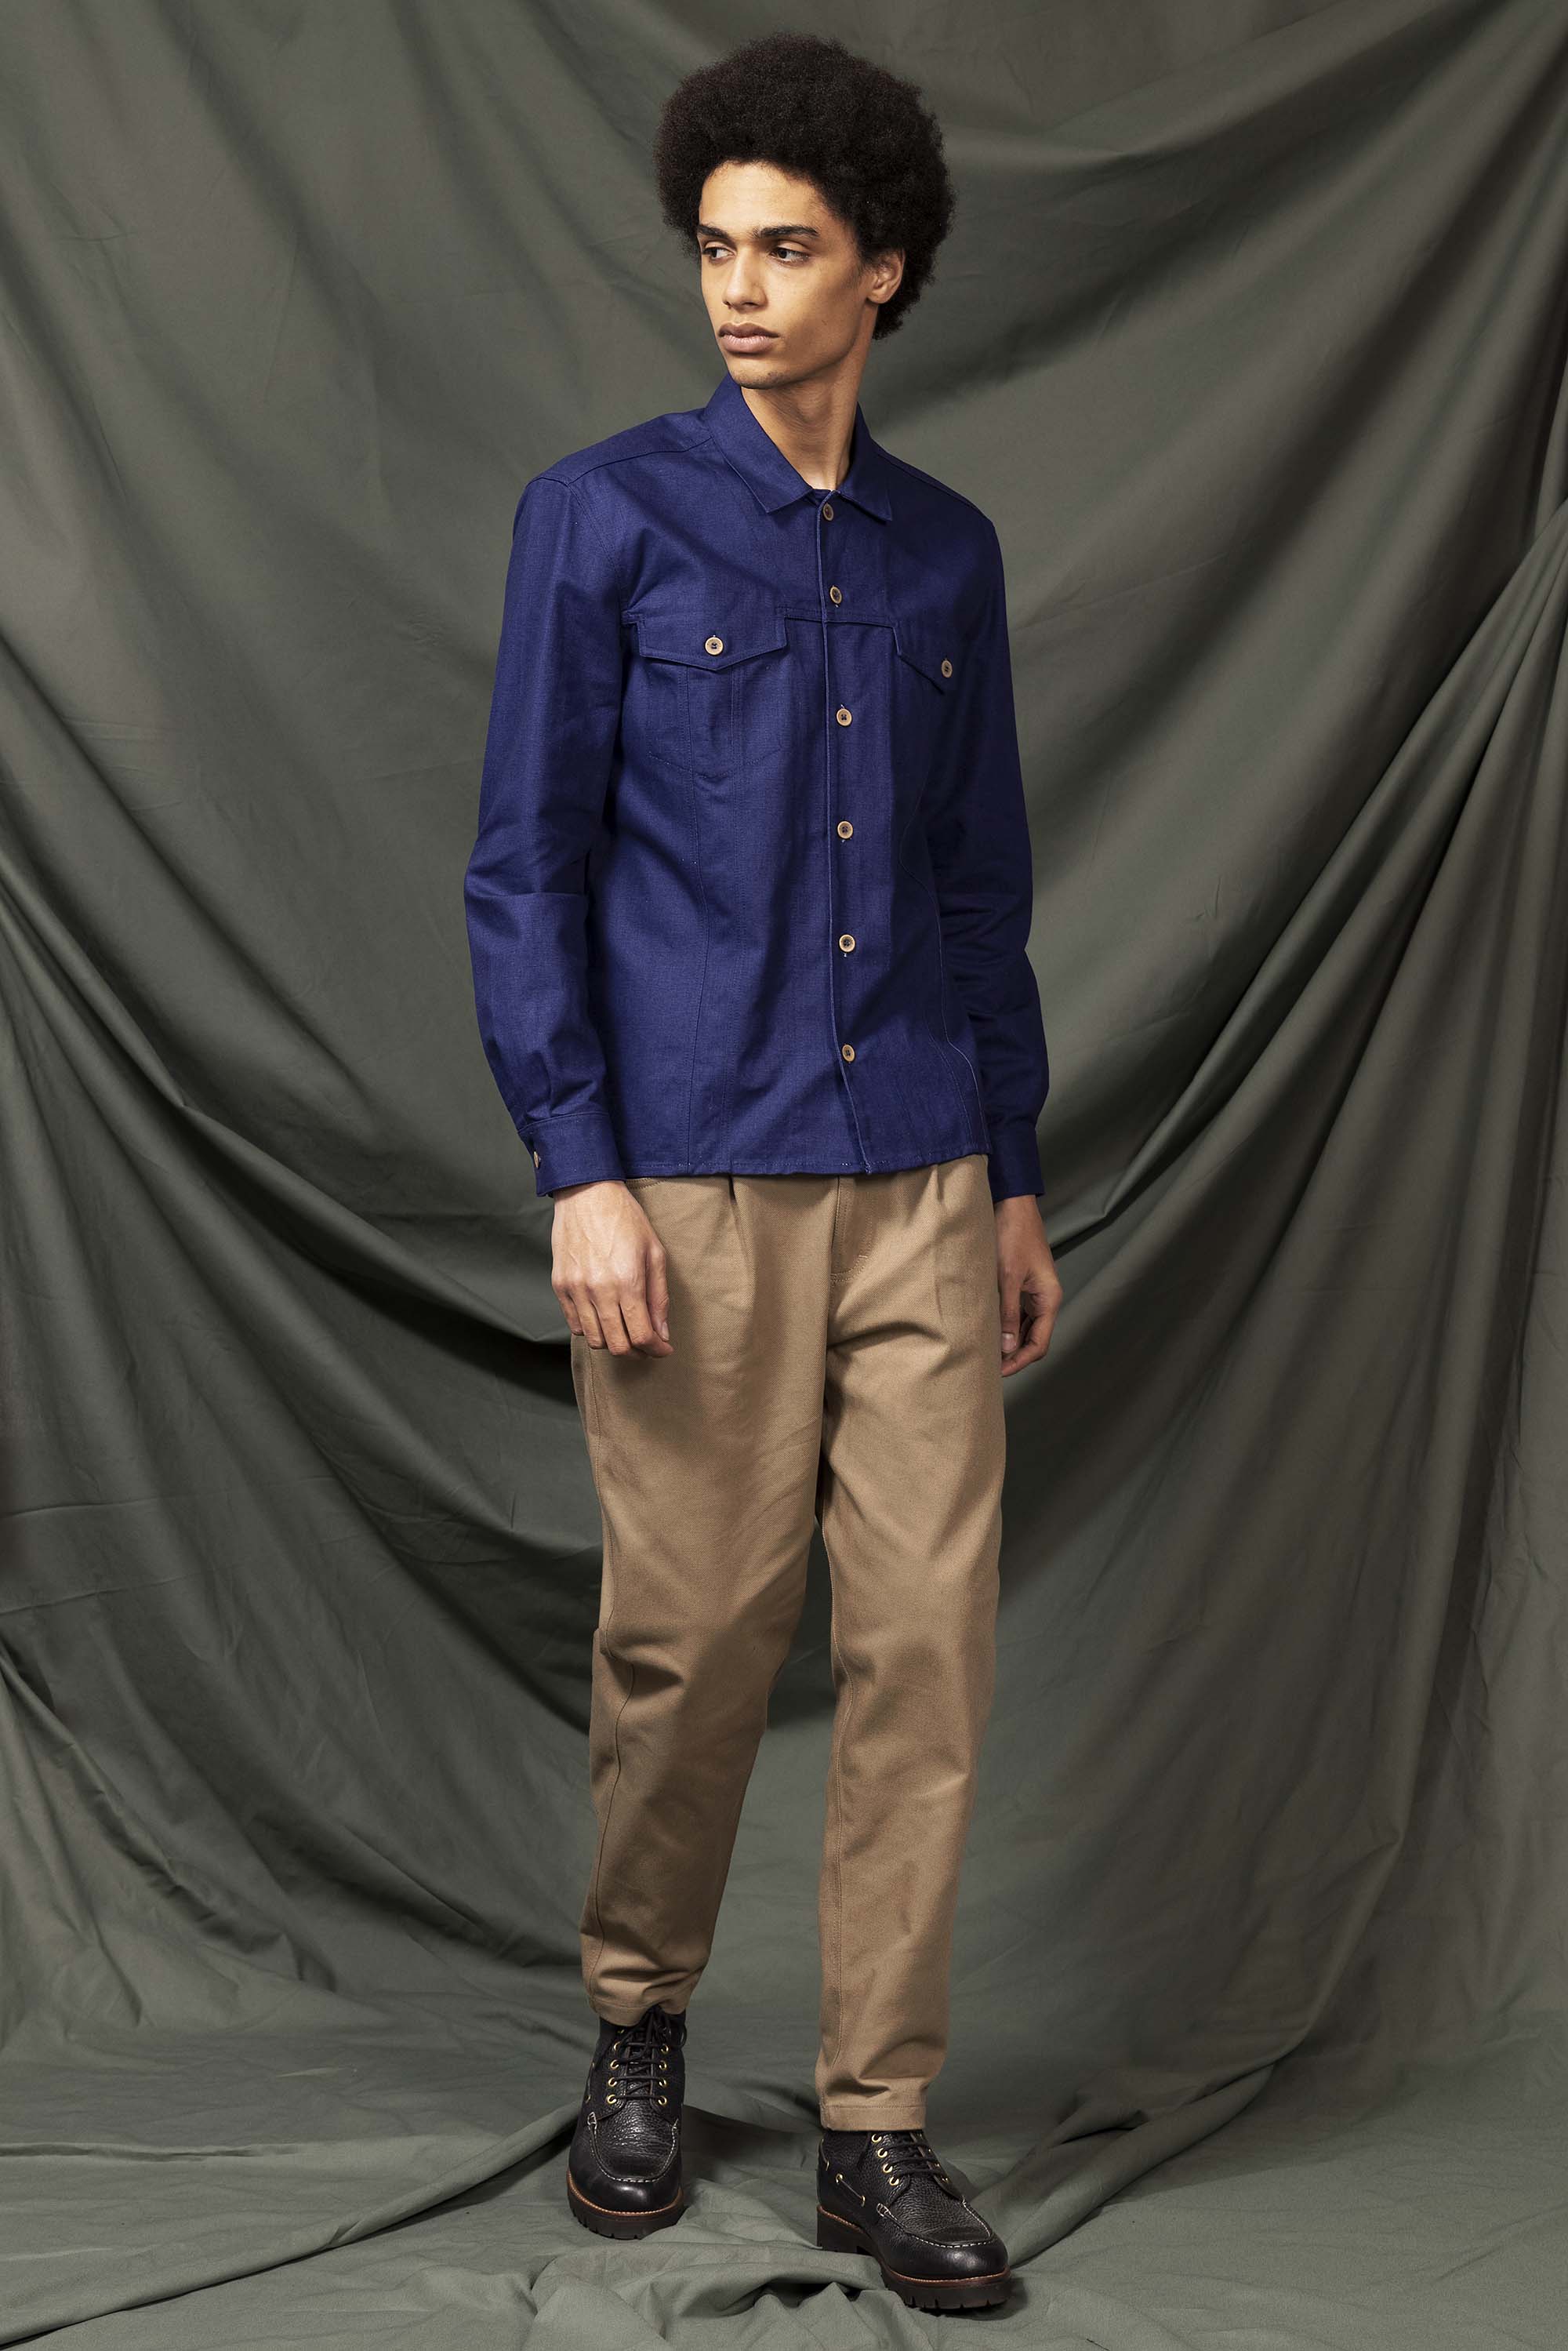 Julian shirt in buttoned jeans with pockets and button placket, made in Peru in the Misericordia workshop